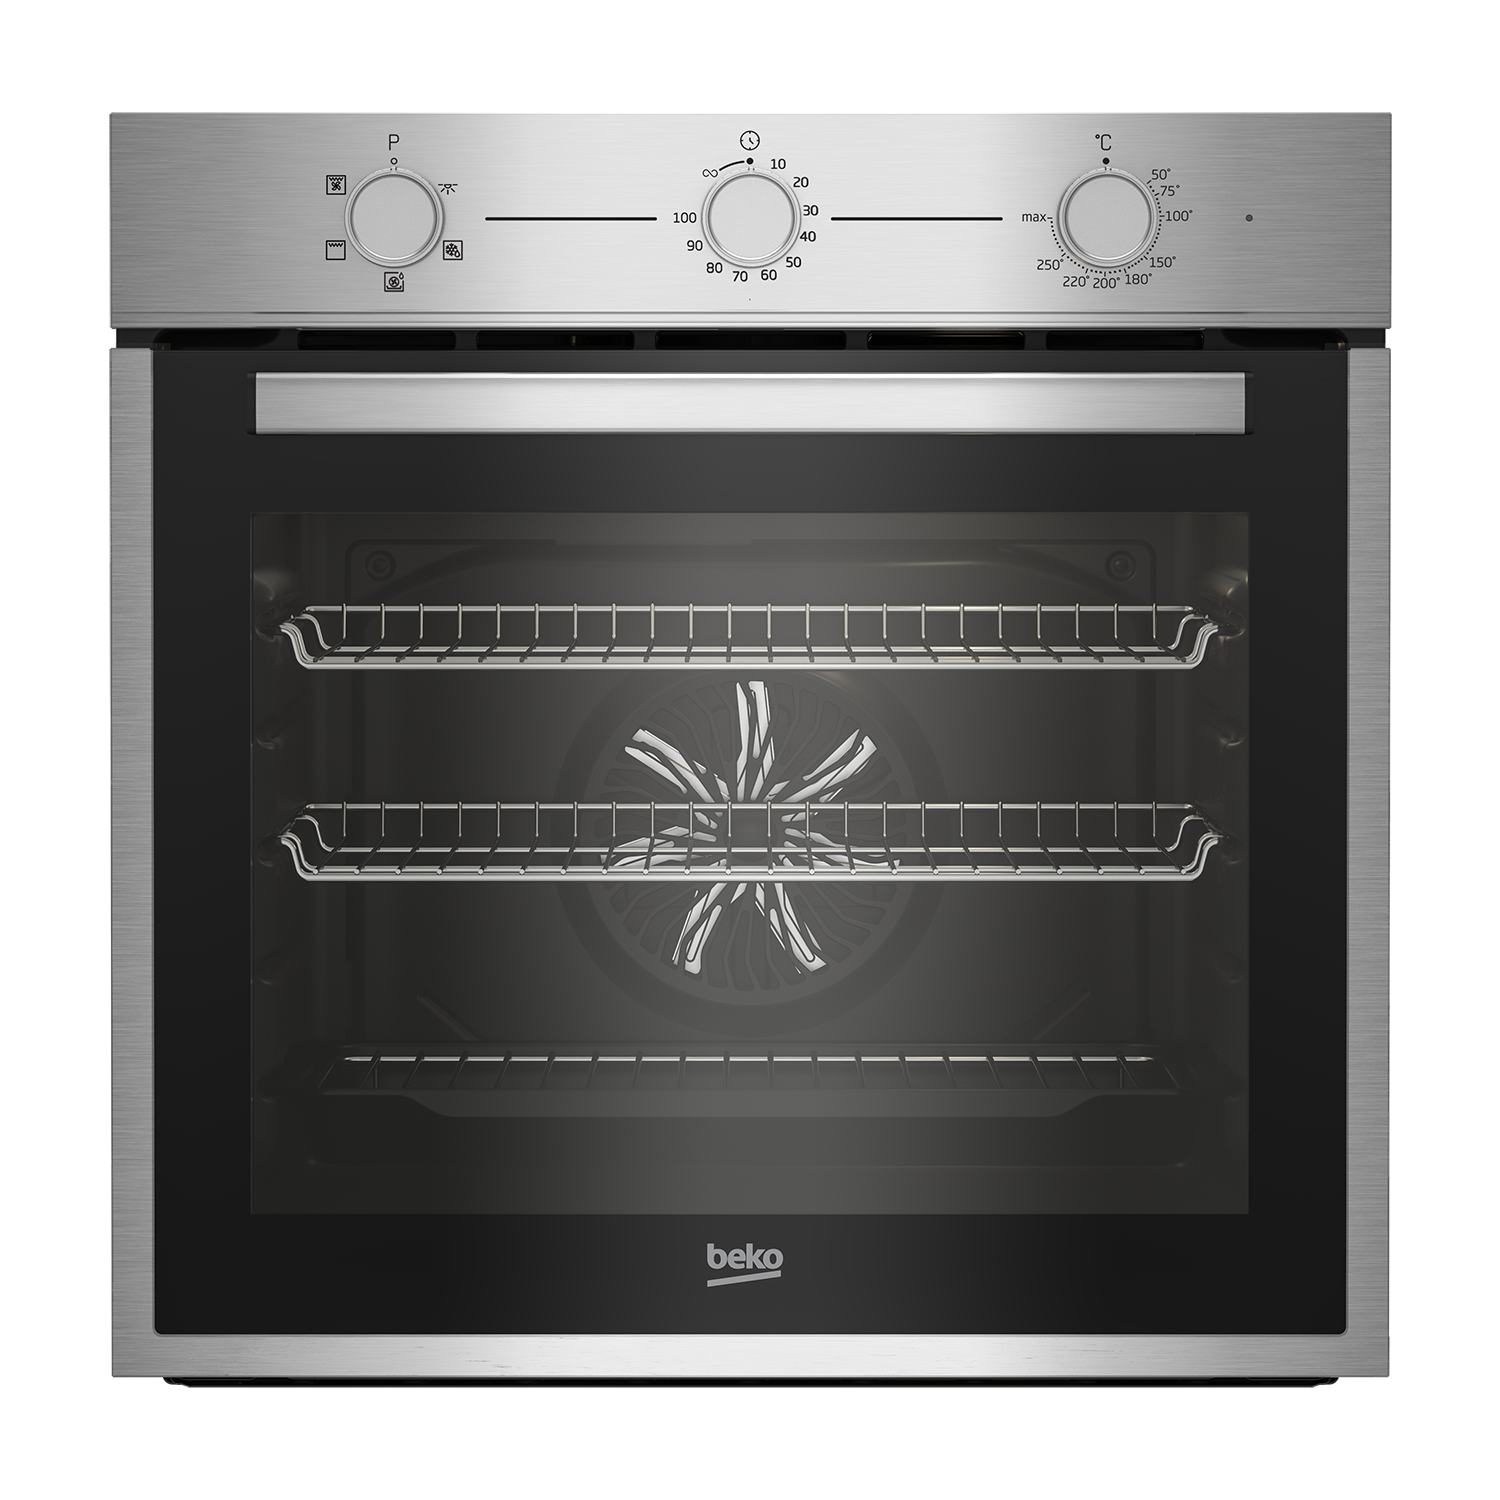 Beko Electric Single Oven with Steam Cleaning - Stainless Steel